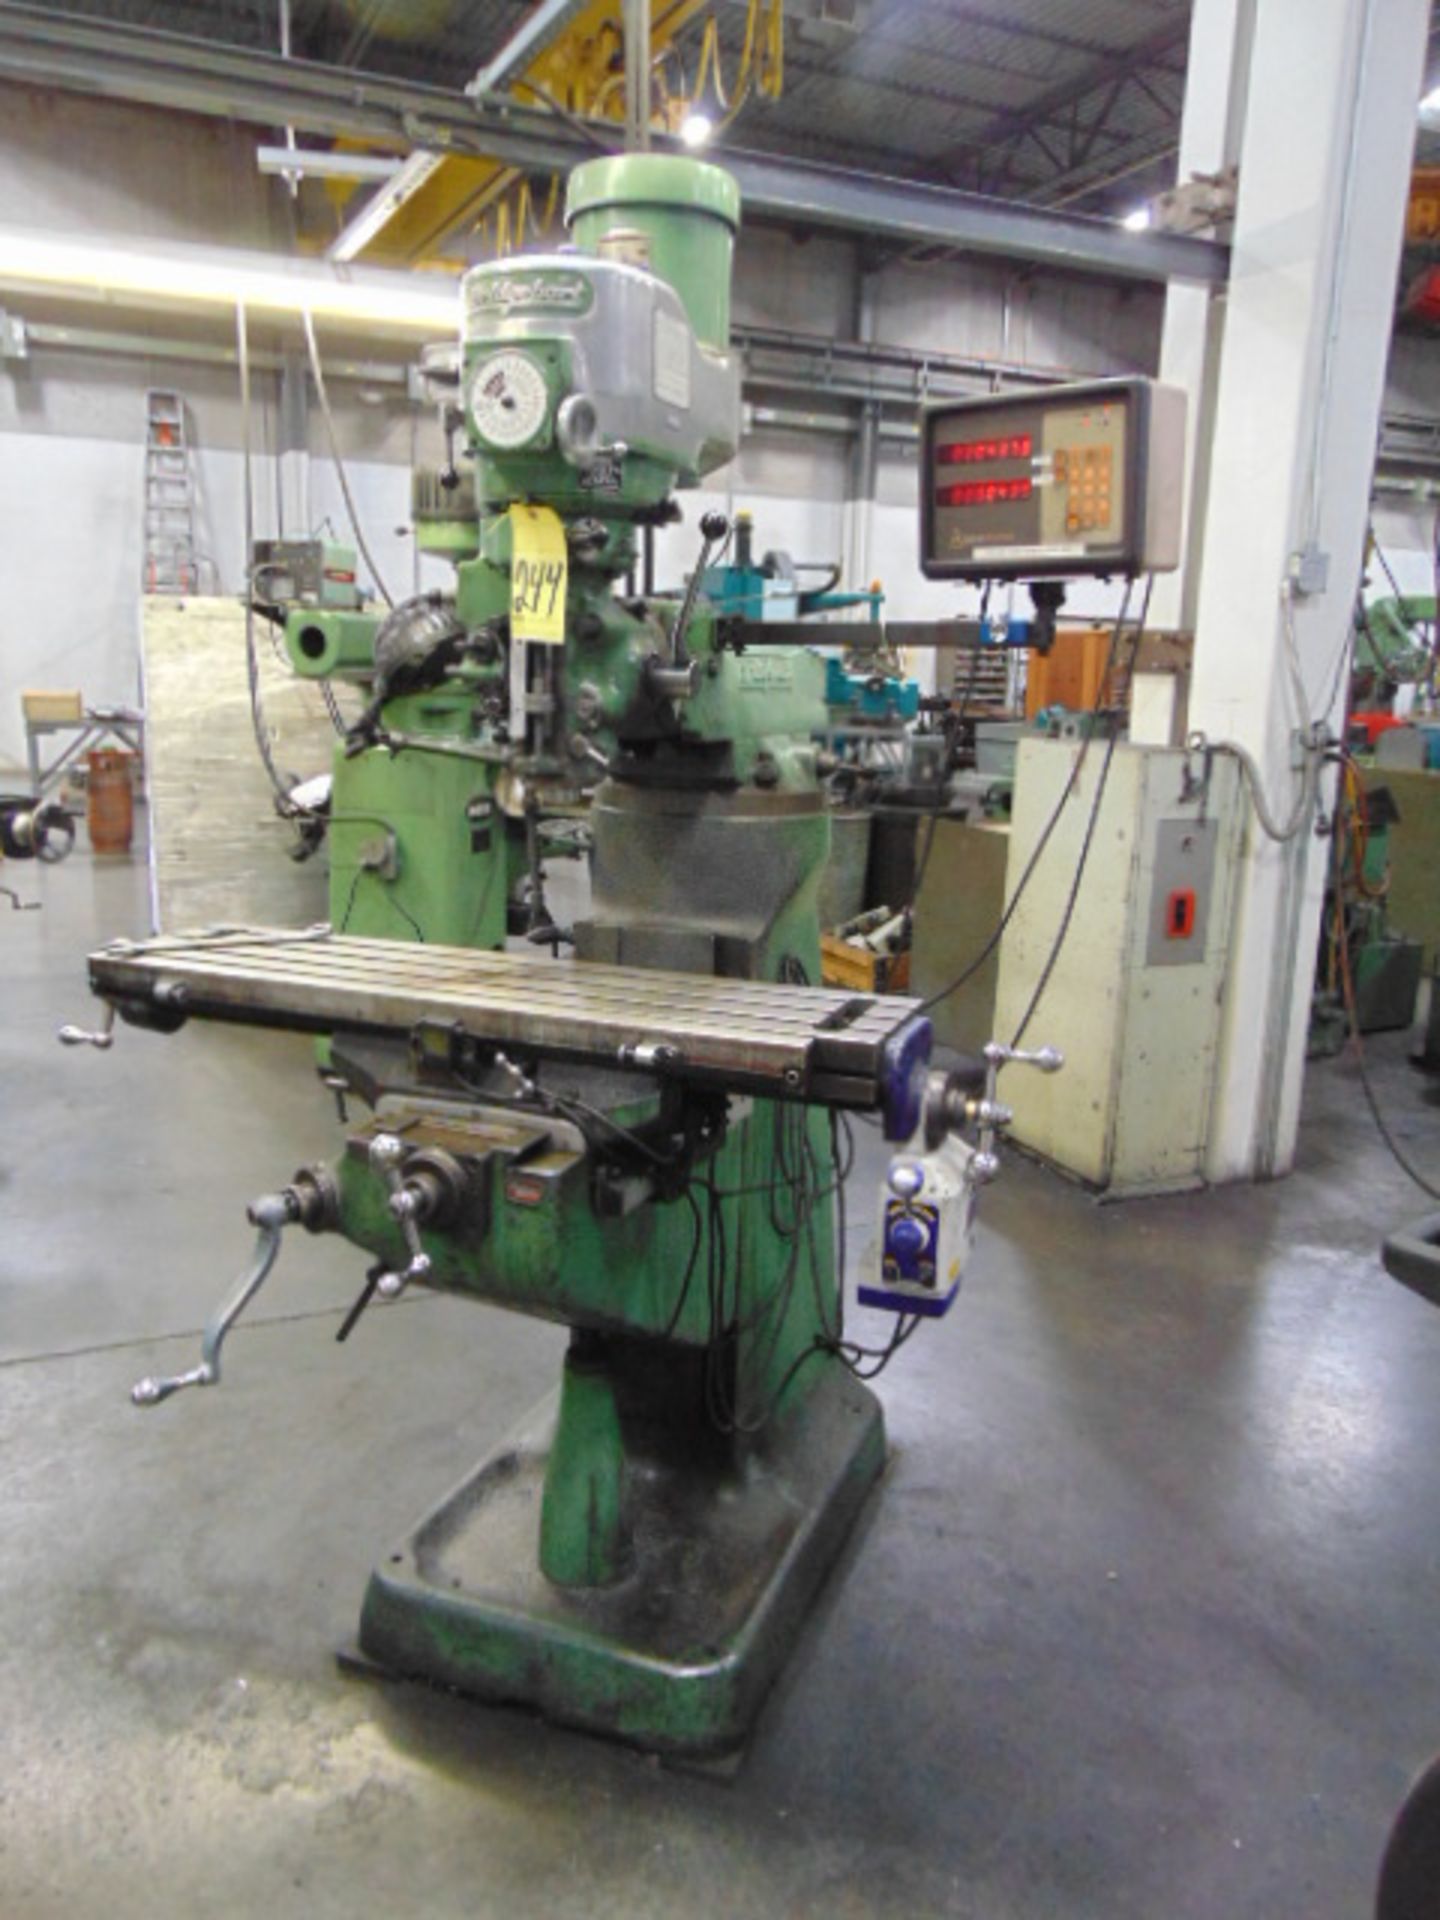 VERTICAL TURRET MILL, BRIDGEPORT MDL. 2J, 9” x 42” table, variable spds: 60-4200 RPM, Anilam D.R.O.,